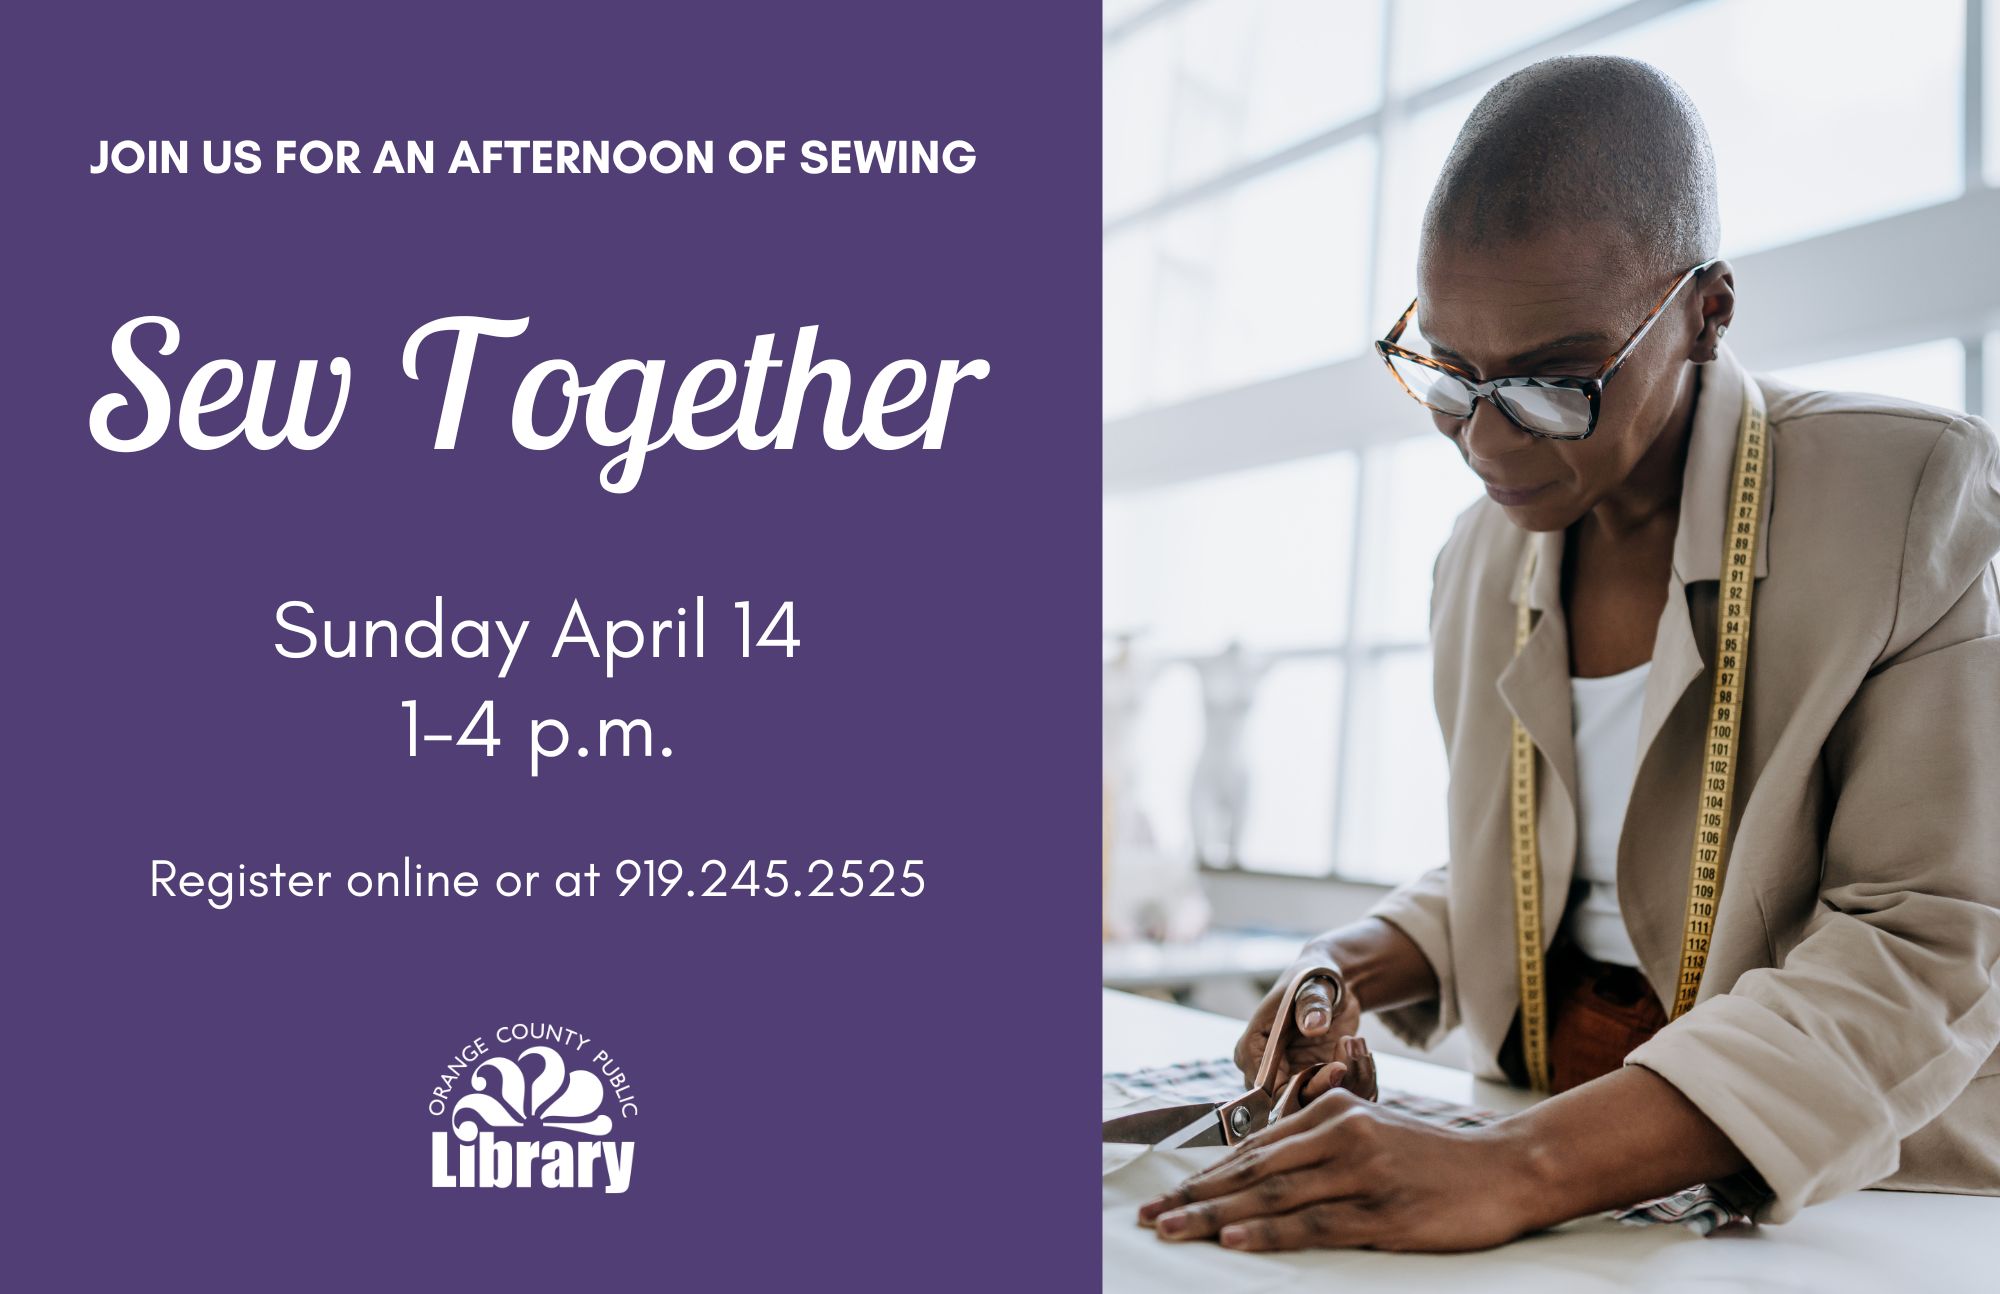 Sew Together for April 14, sewist with tape measure, cutting fabric